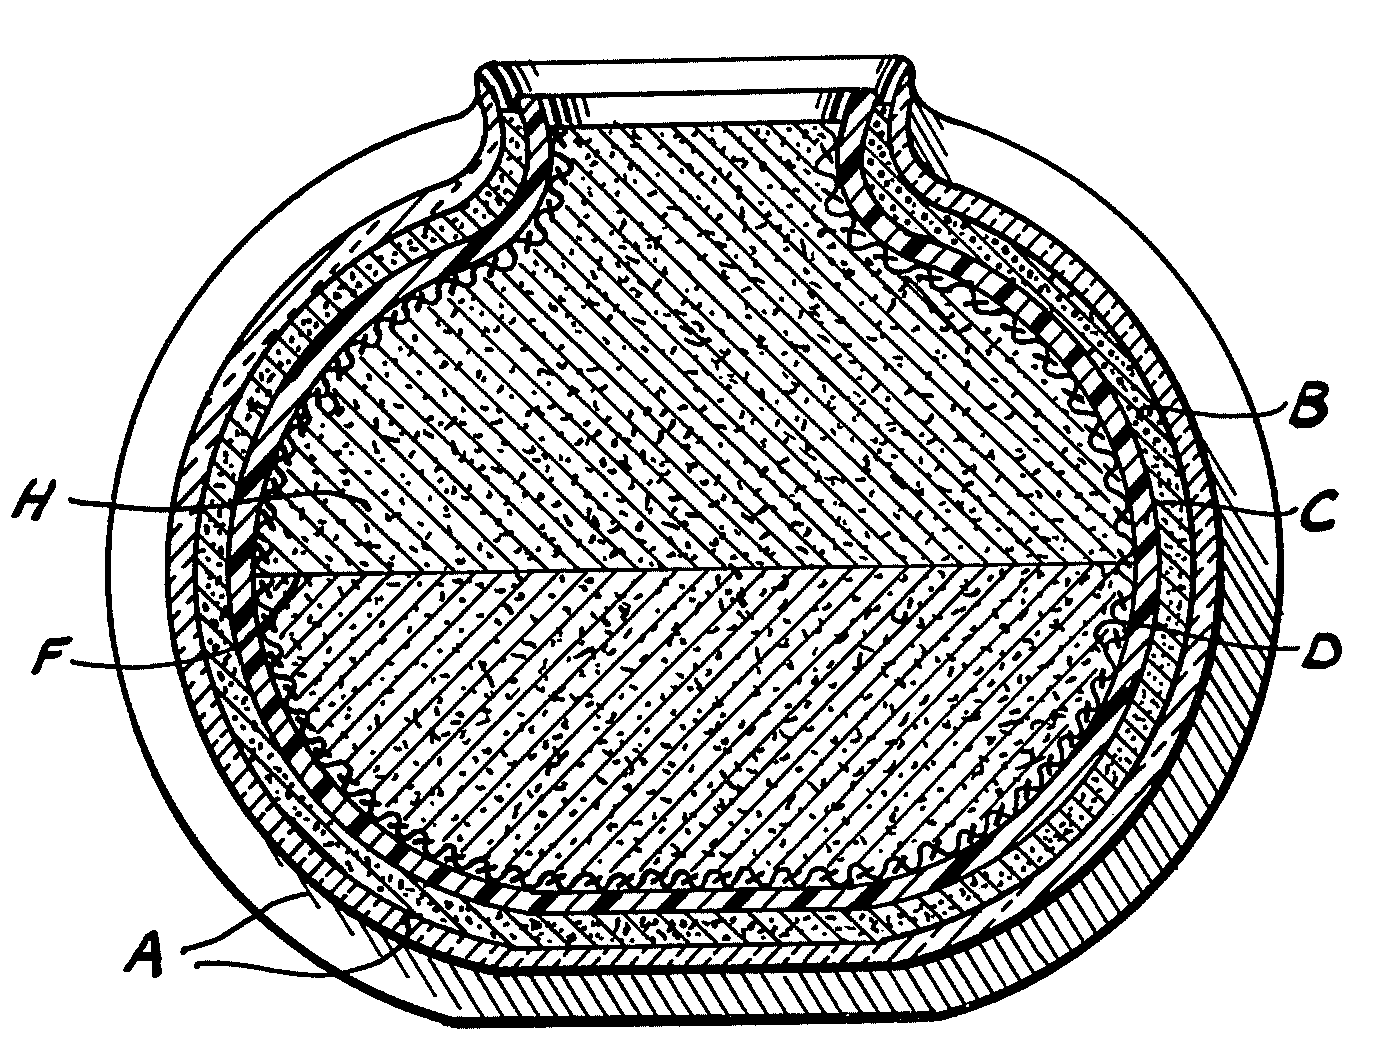 example of a pottery structure cross section